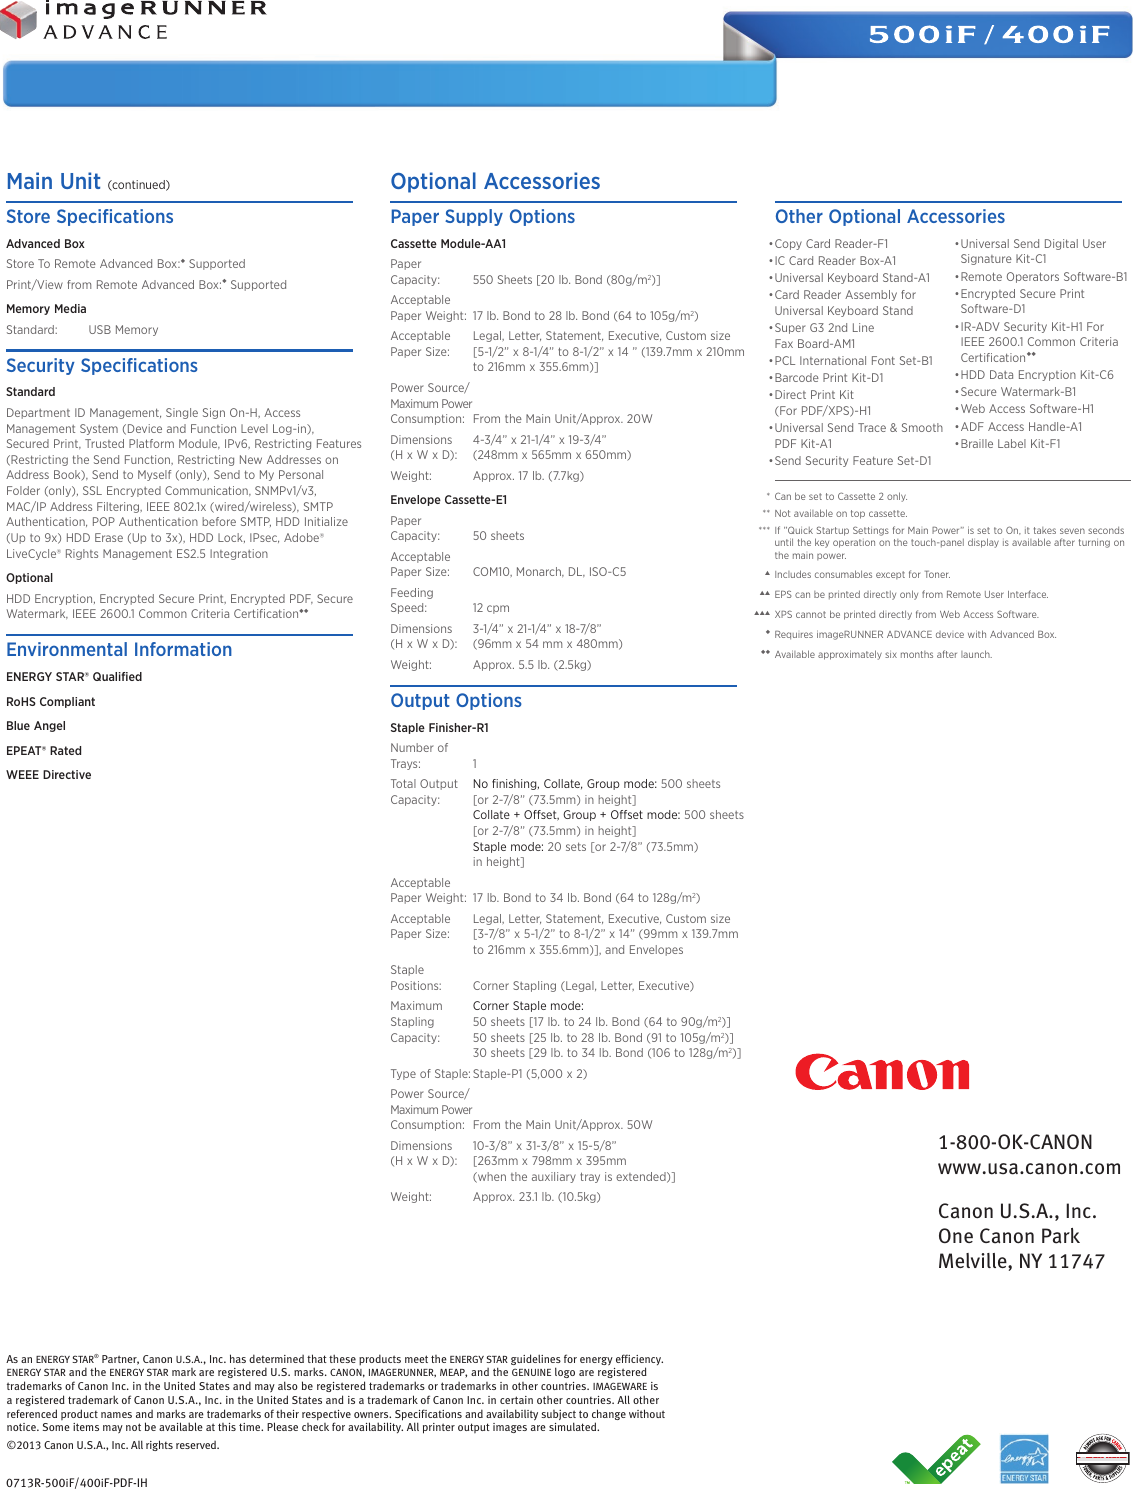 Page 3 of 3 - Canon Canon-Imagerunner-Advance-400If-Specification-Sheet- IRA500-400if Specs Update 0713  Canon-imagerunner-advance-400if-specification-sheet